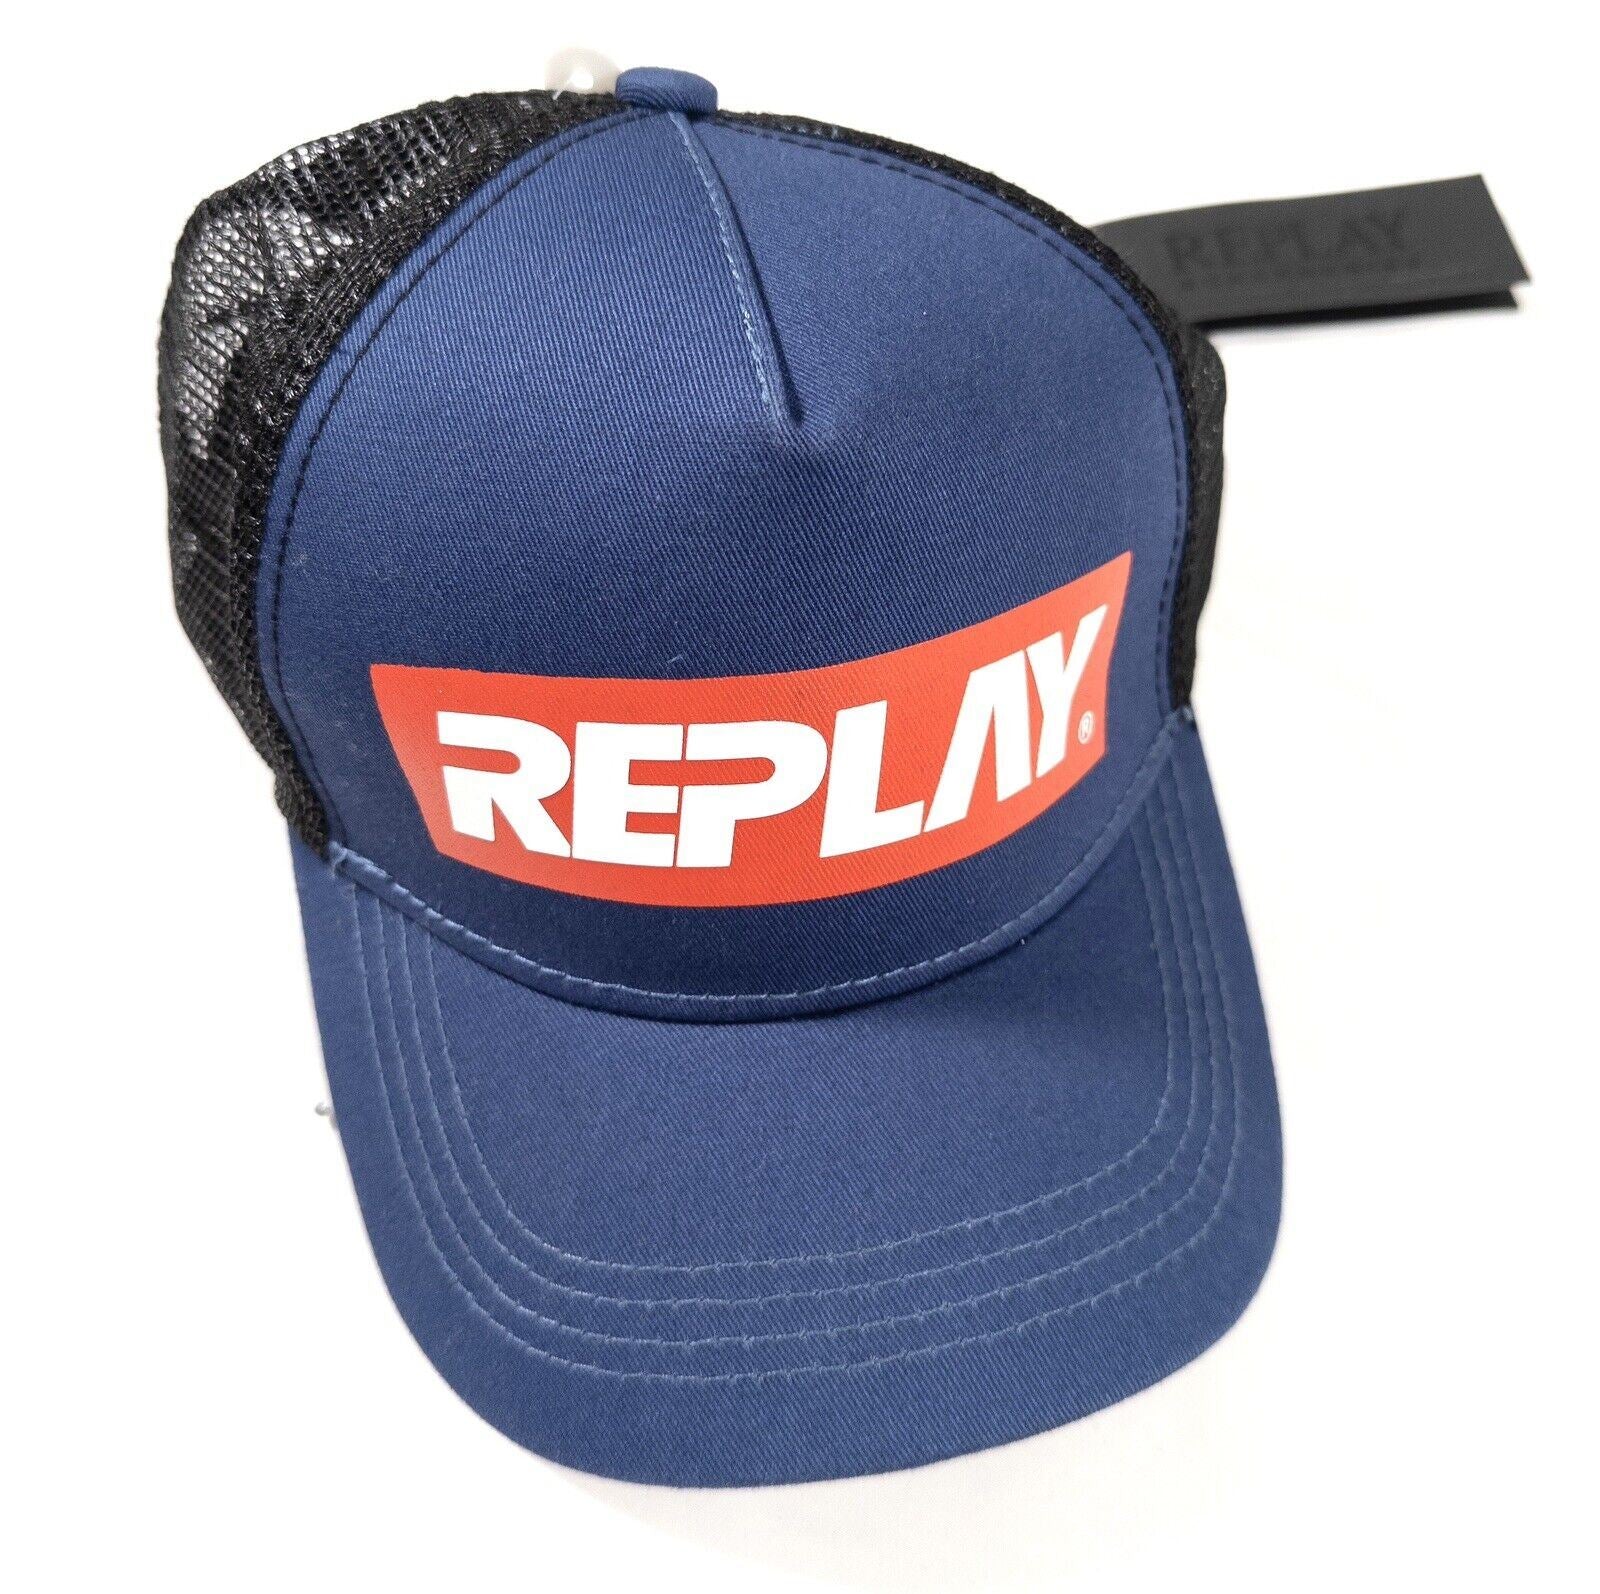 REPLAY Women's Baseball Cap Trucker Hat Blue and Black Size One Size